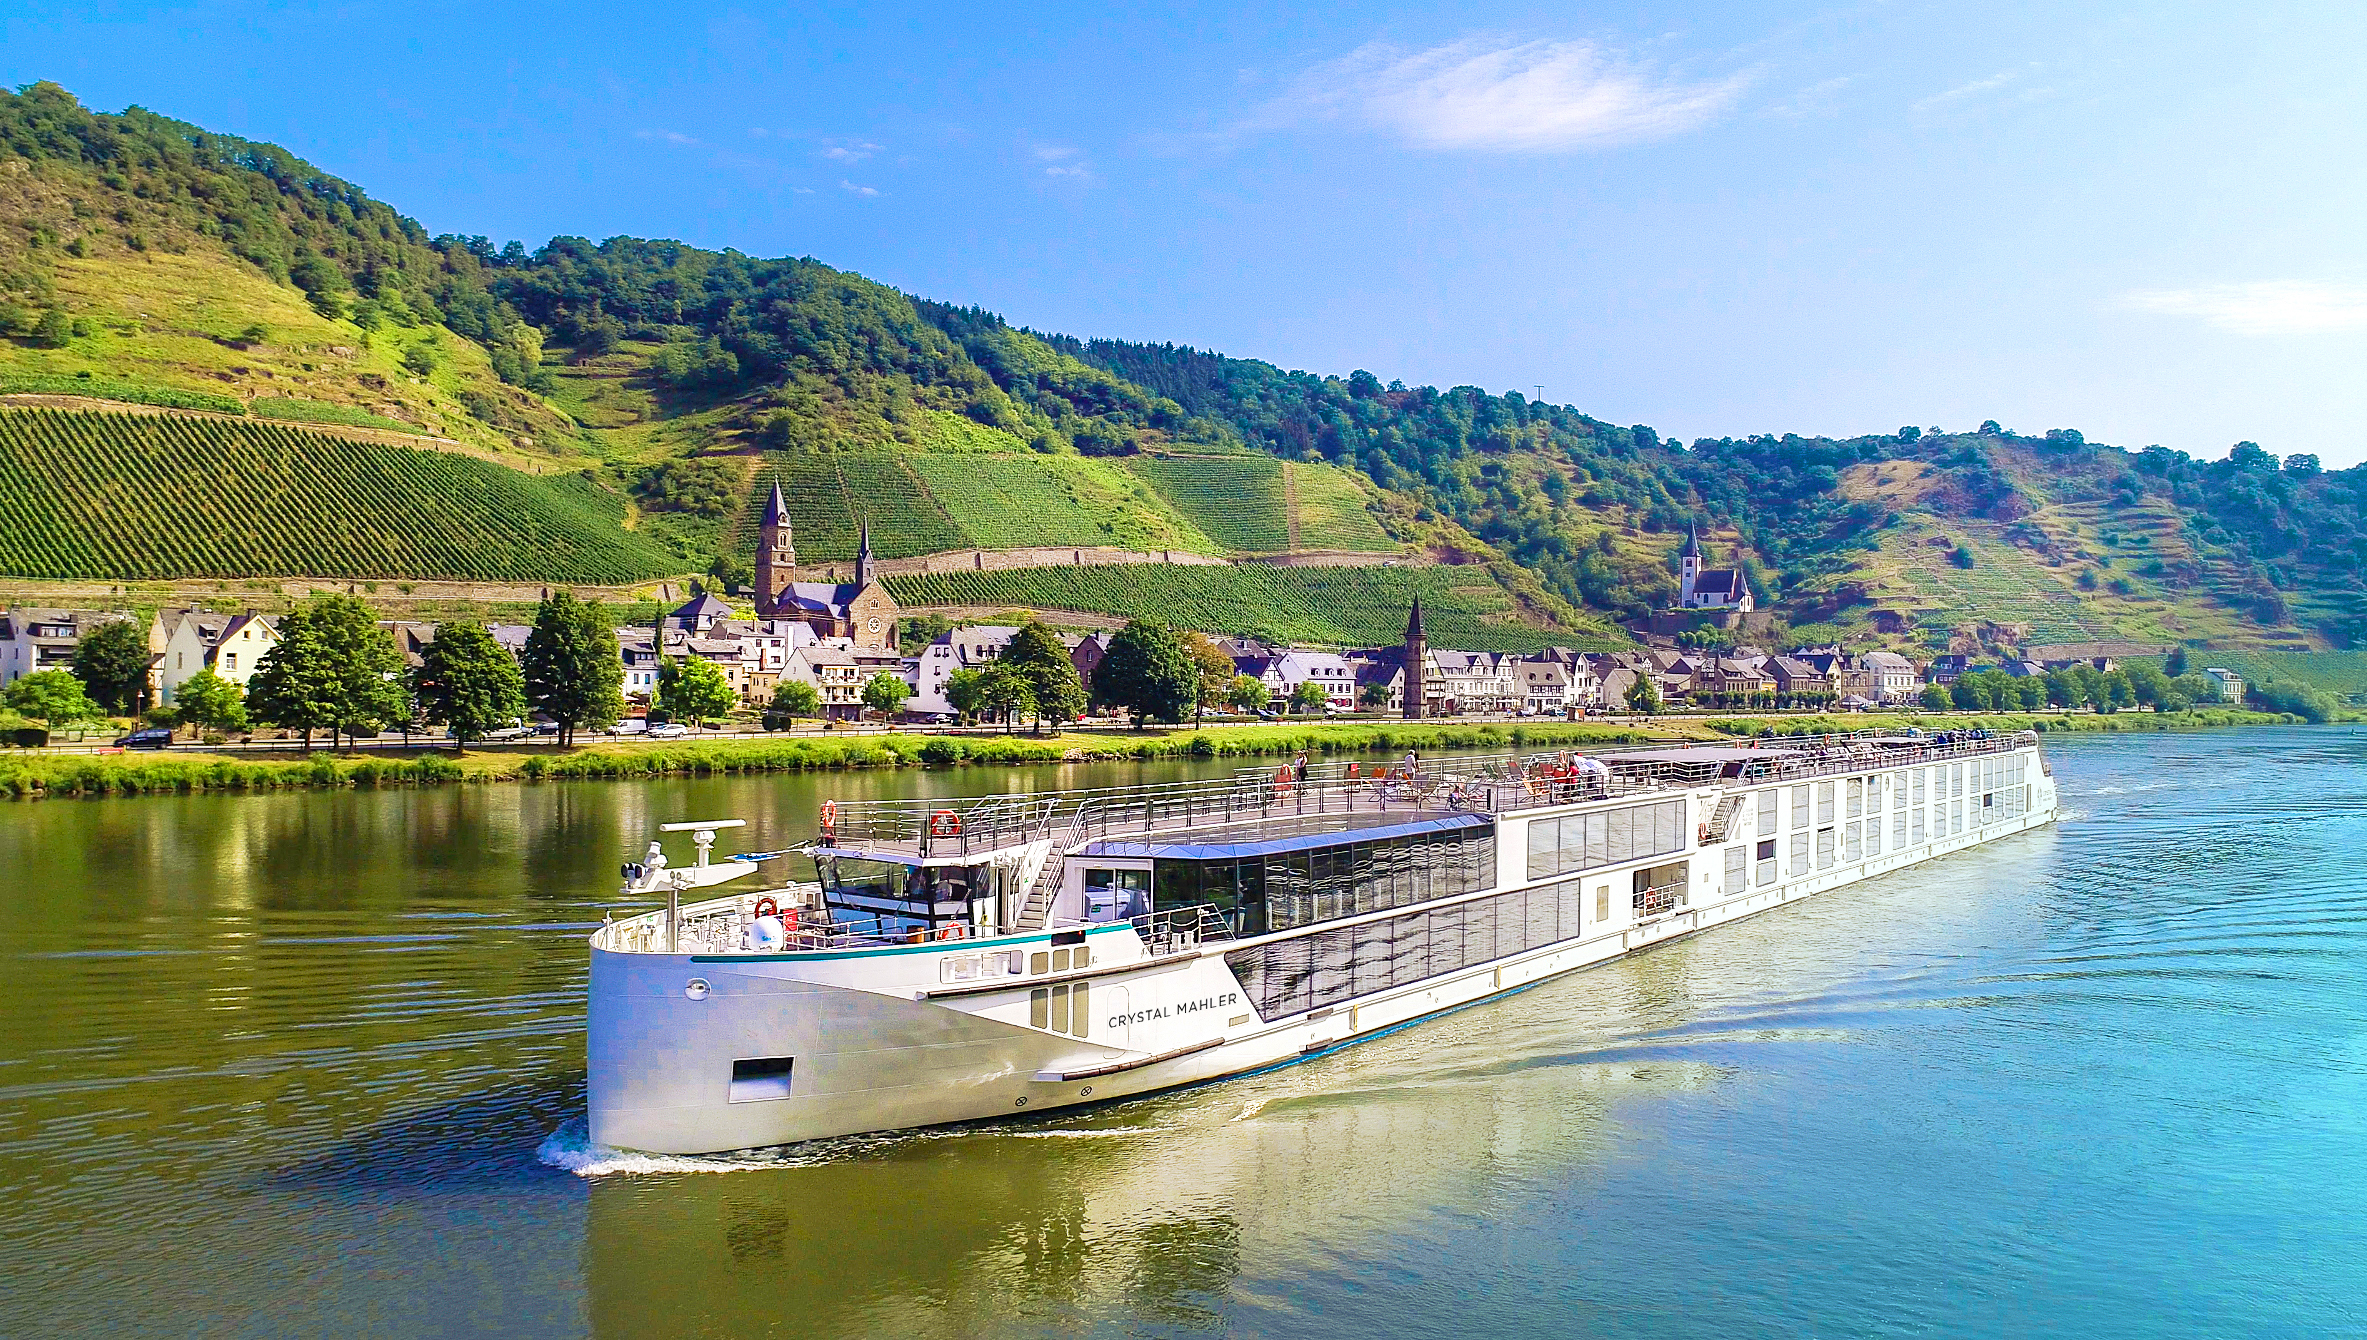 Crystal Mahler sailing along the Moselle. Crystal River Cruises was named #1 River Cruise Line in Travel + Leisure's 2020 World's Best Awards.